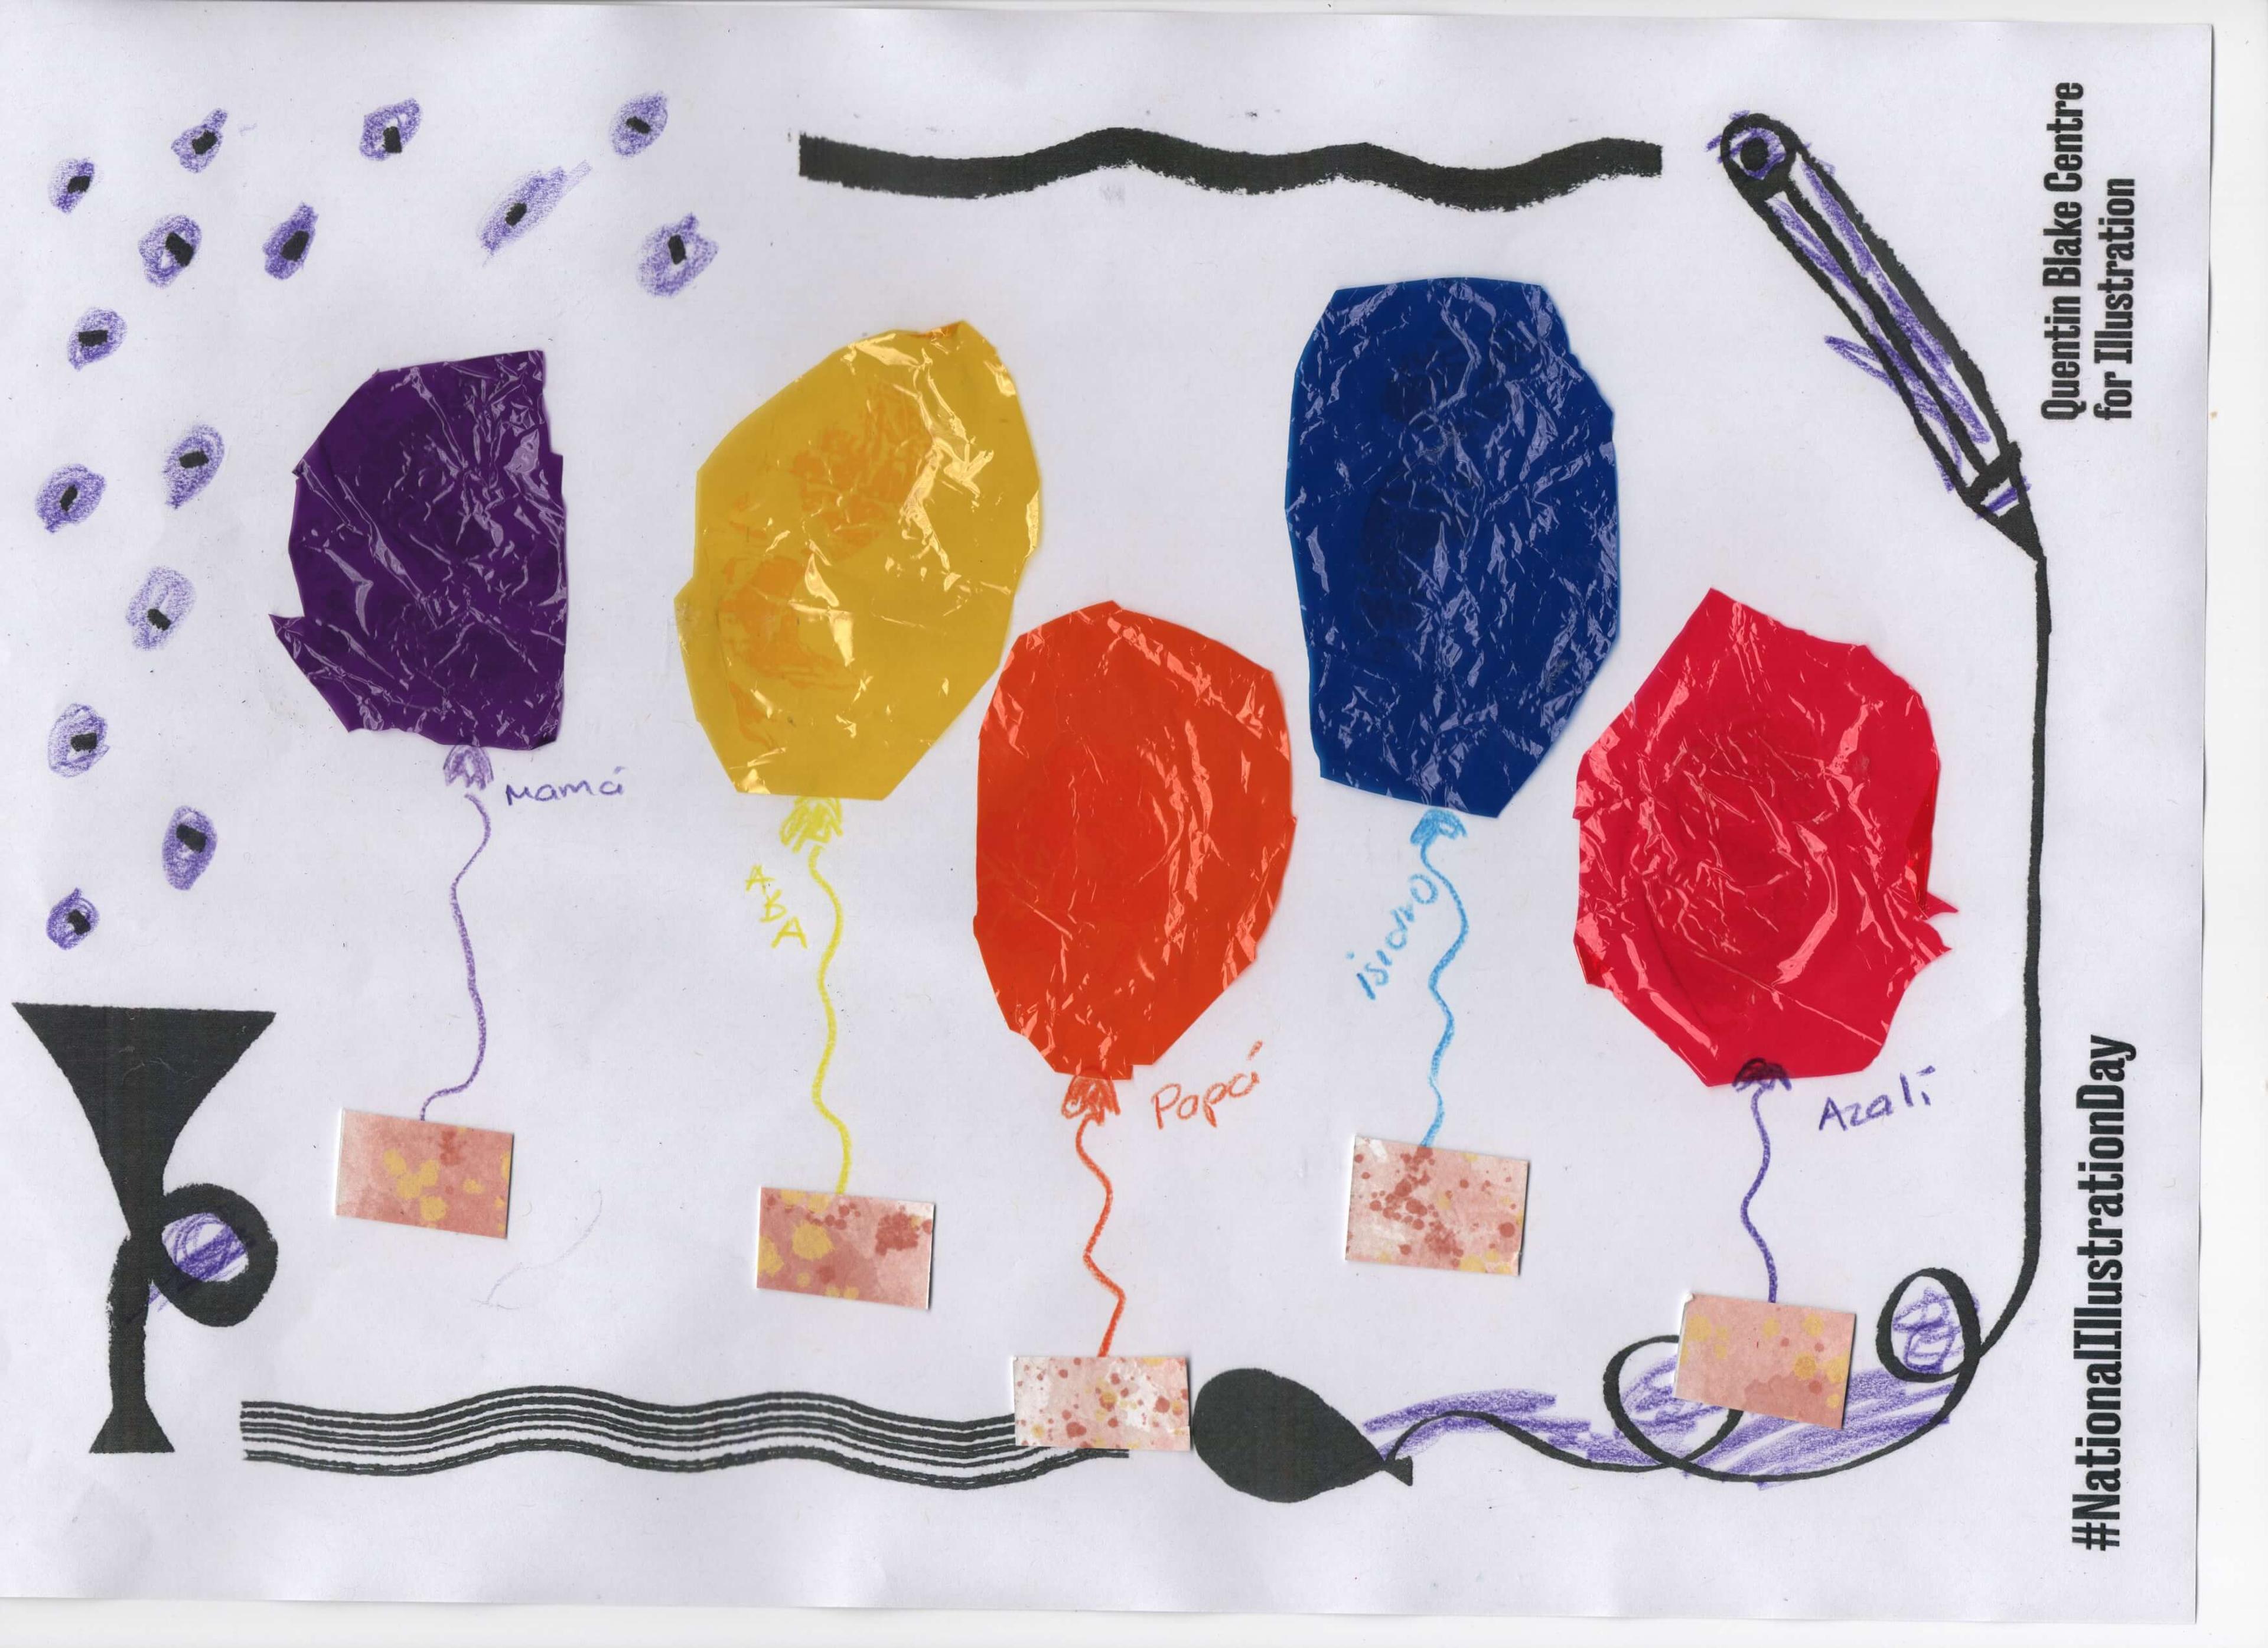 Collaged balloons made using colourful cellophane paper. 